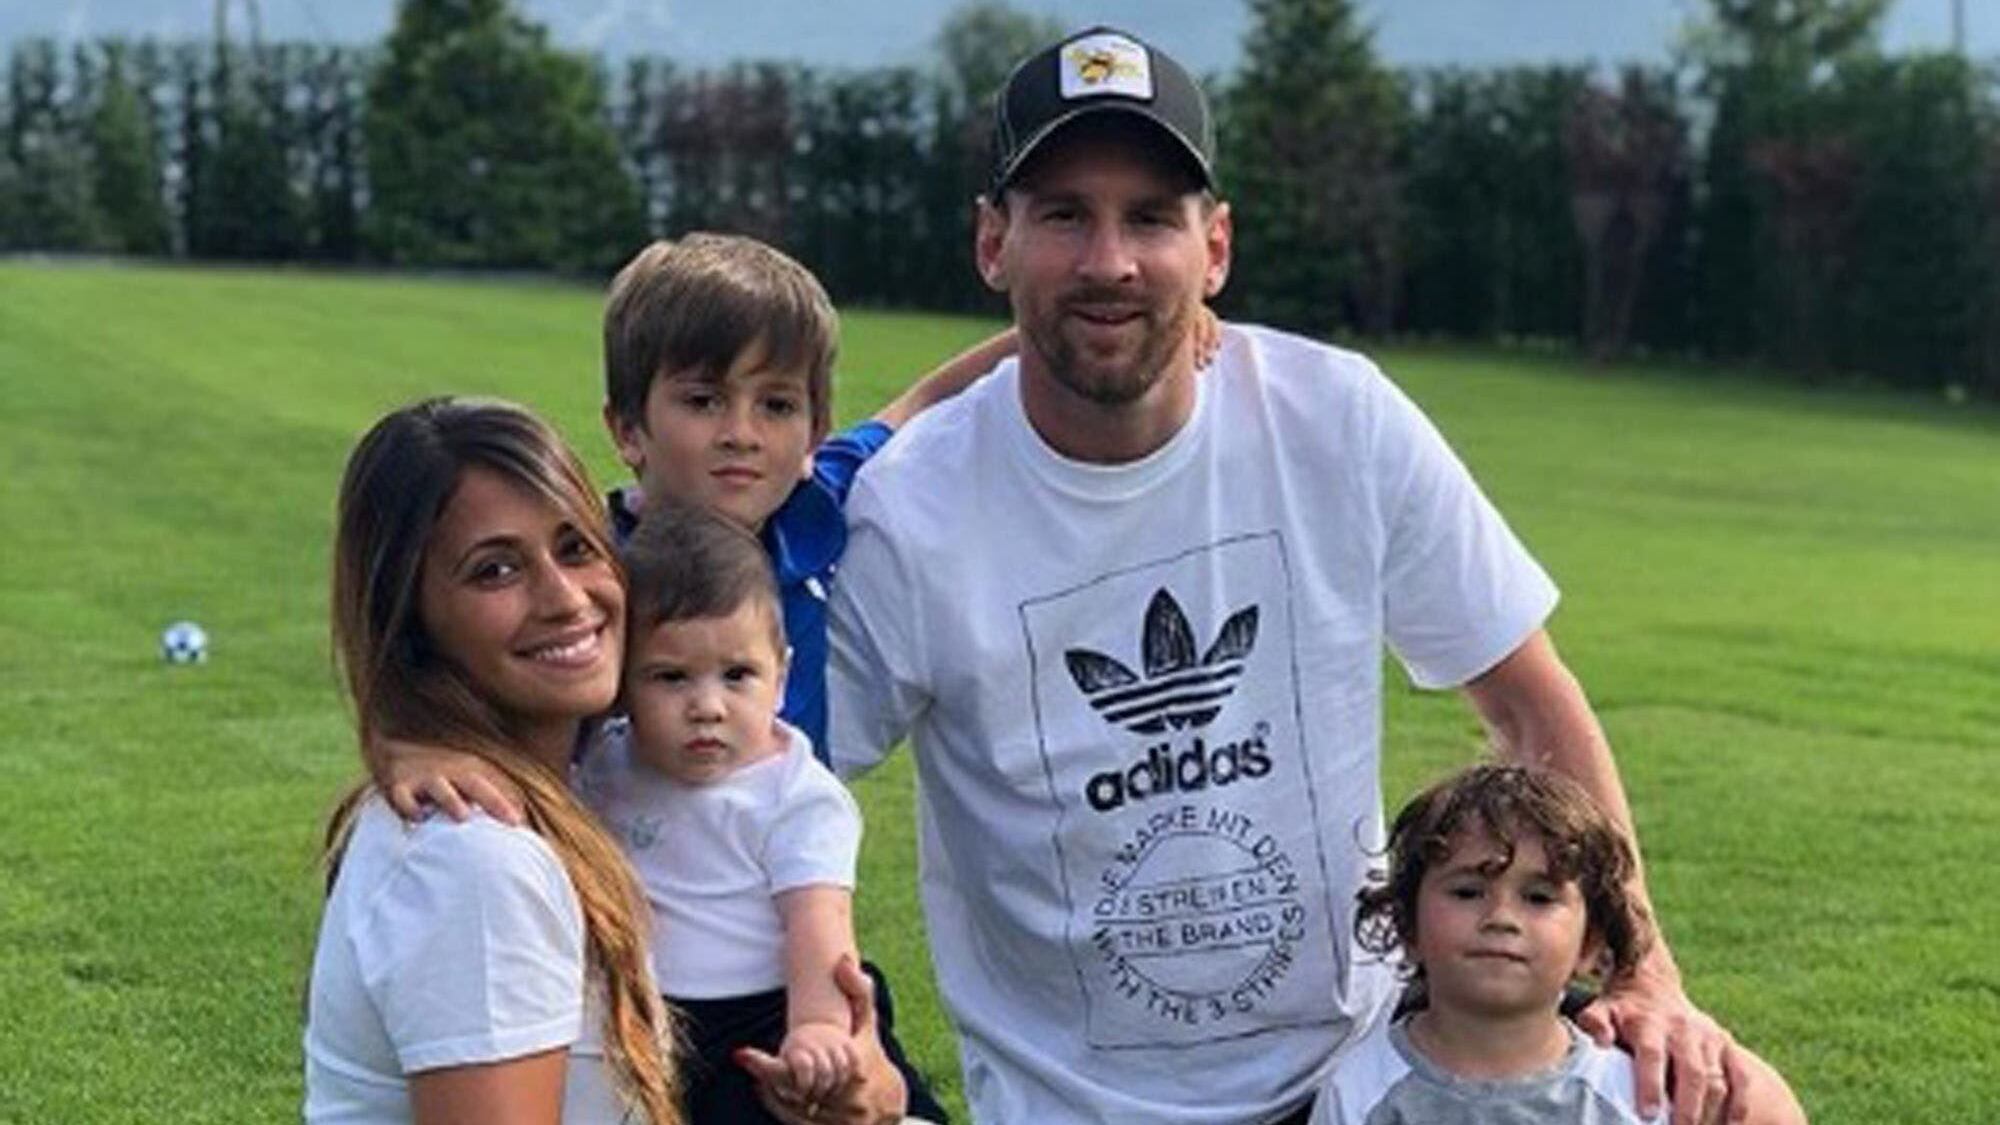 The sons of Lionel Messi went viral again with their reaction to their father's goal